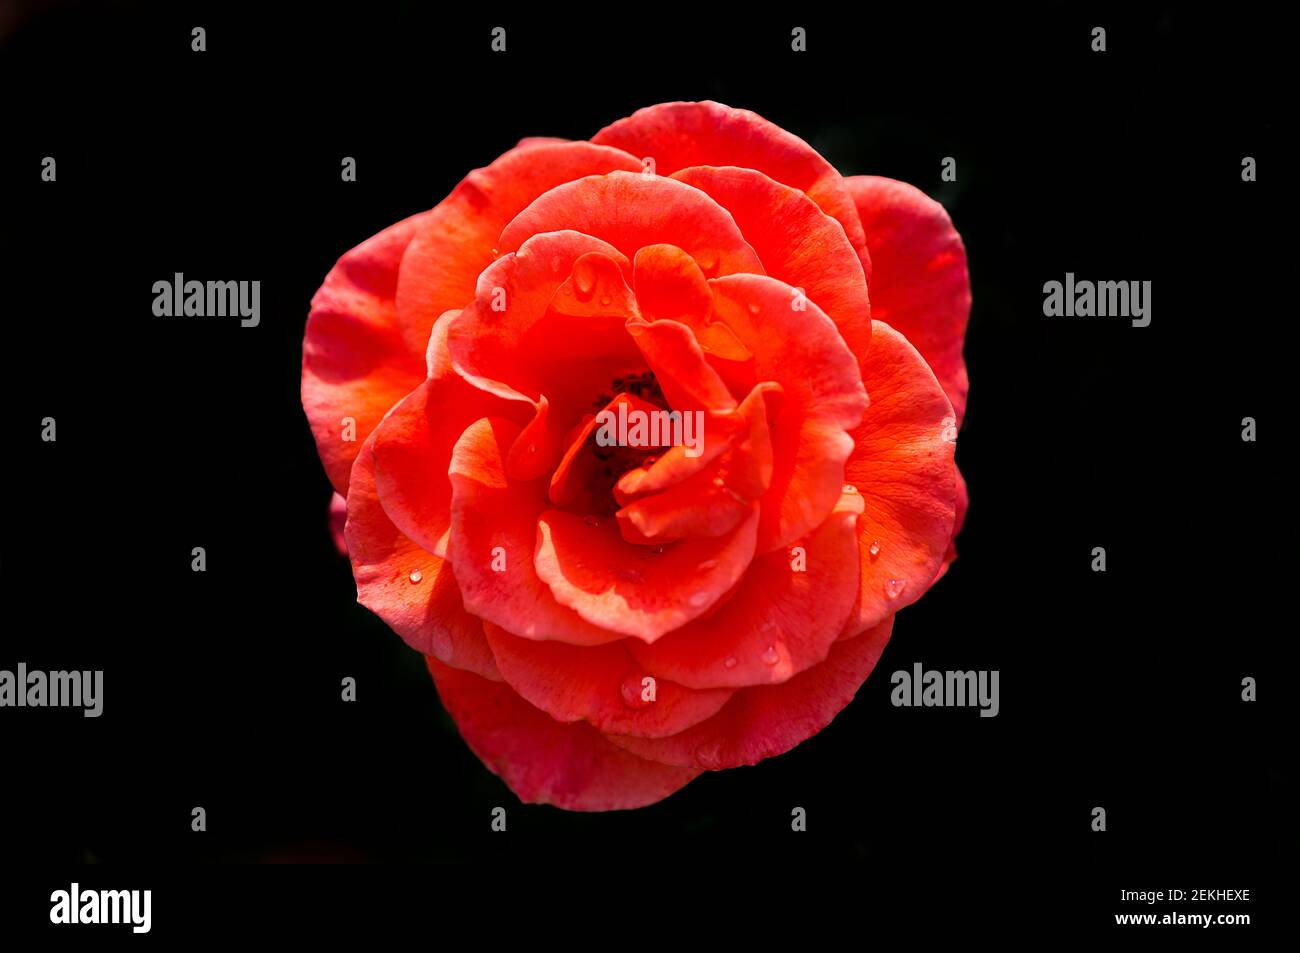 Red rose flower head in black background Stock Photo